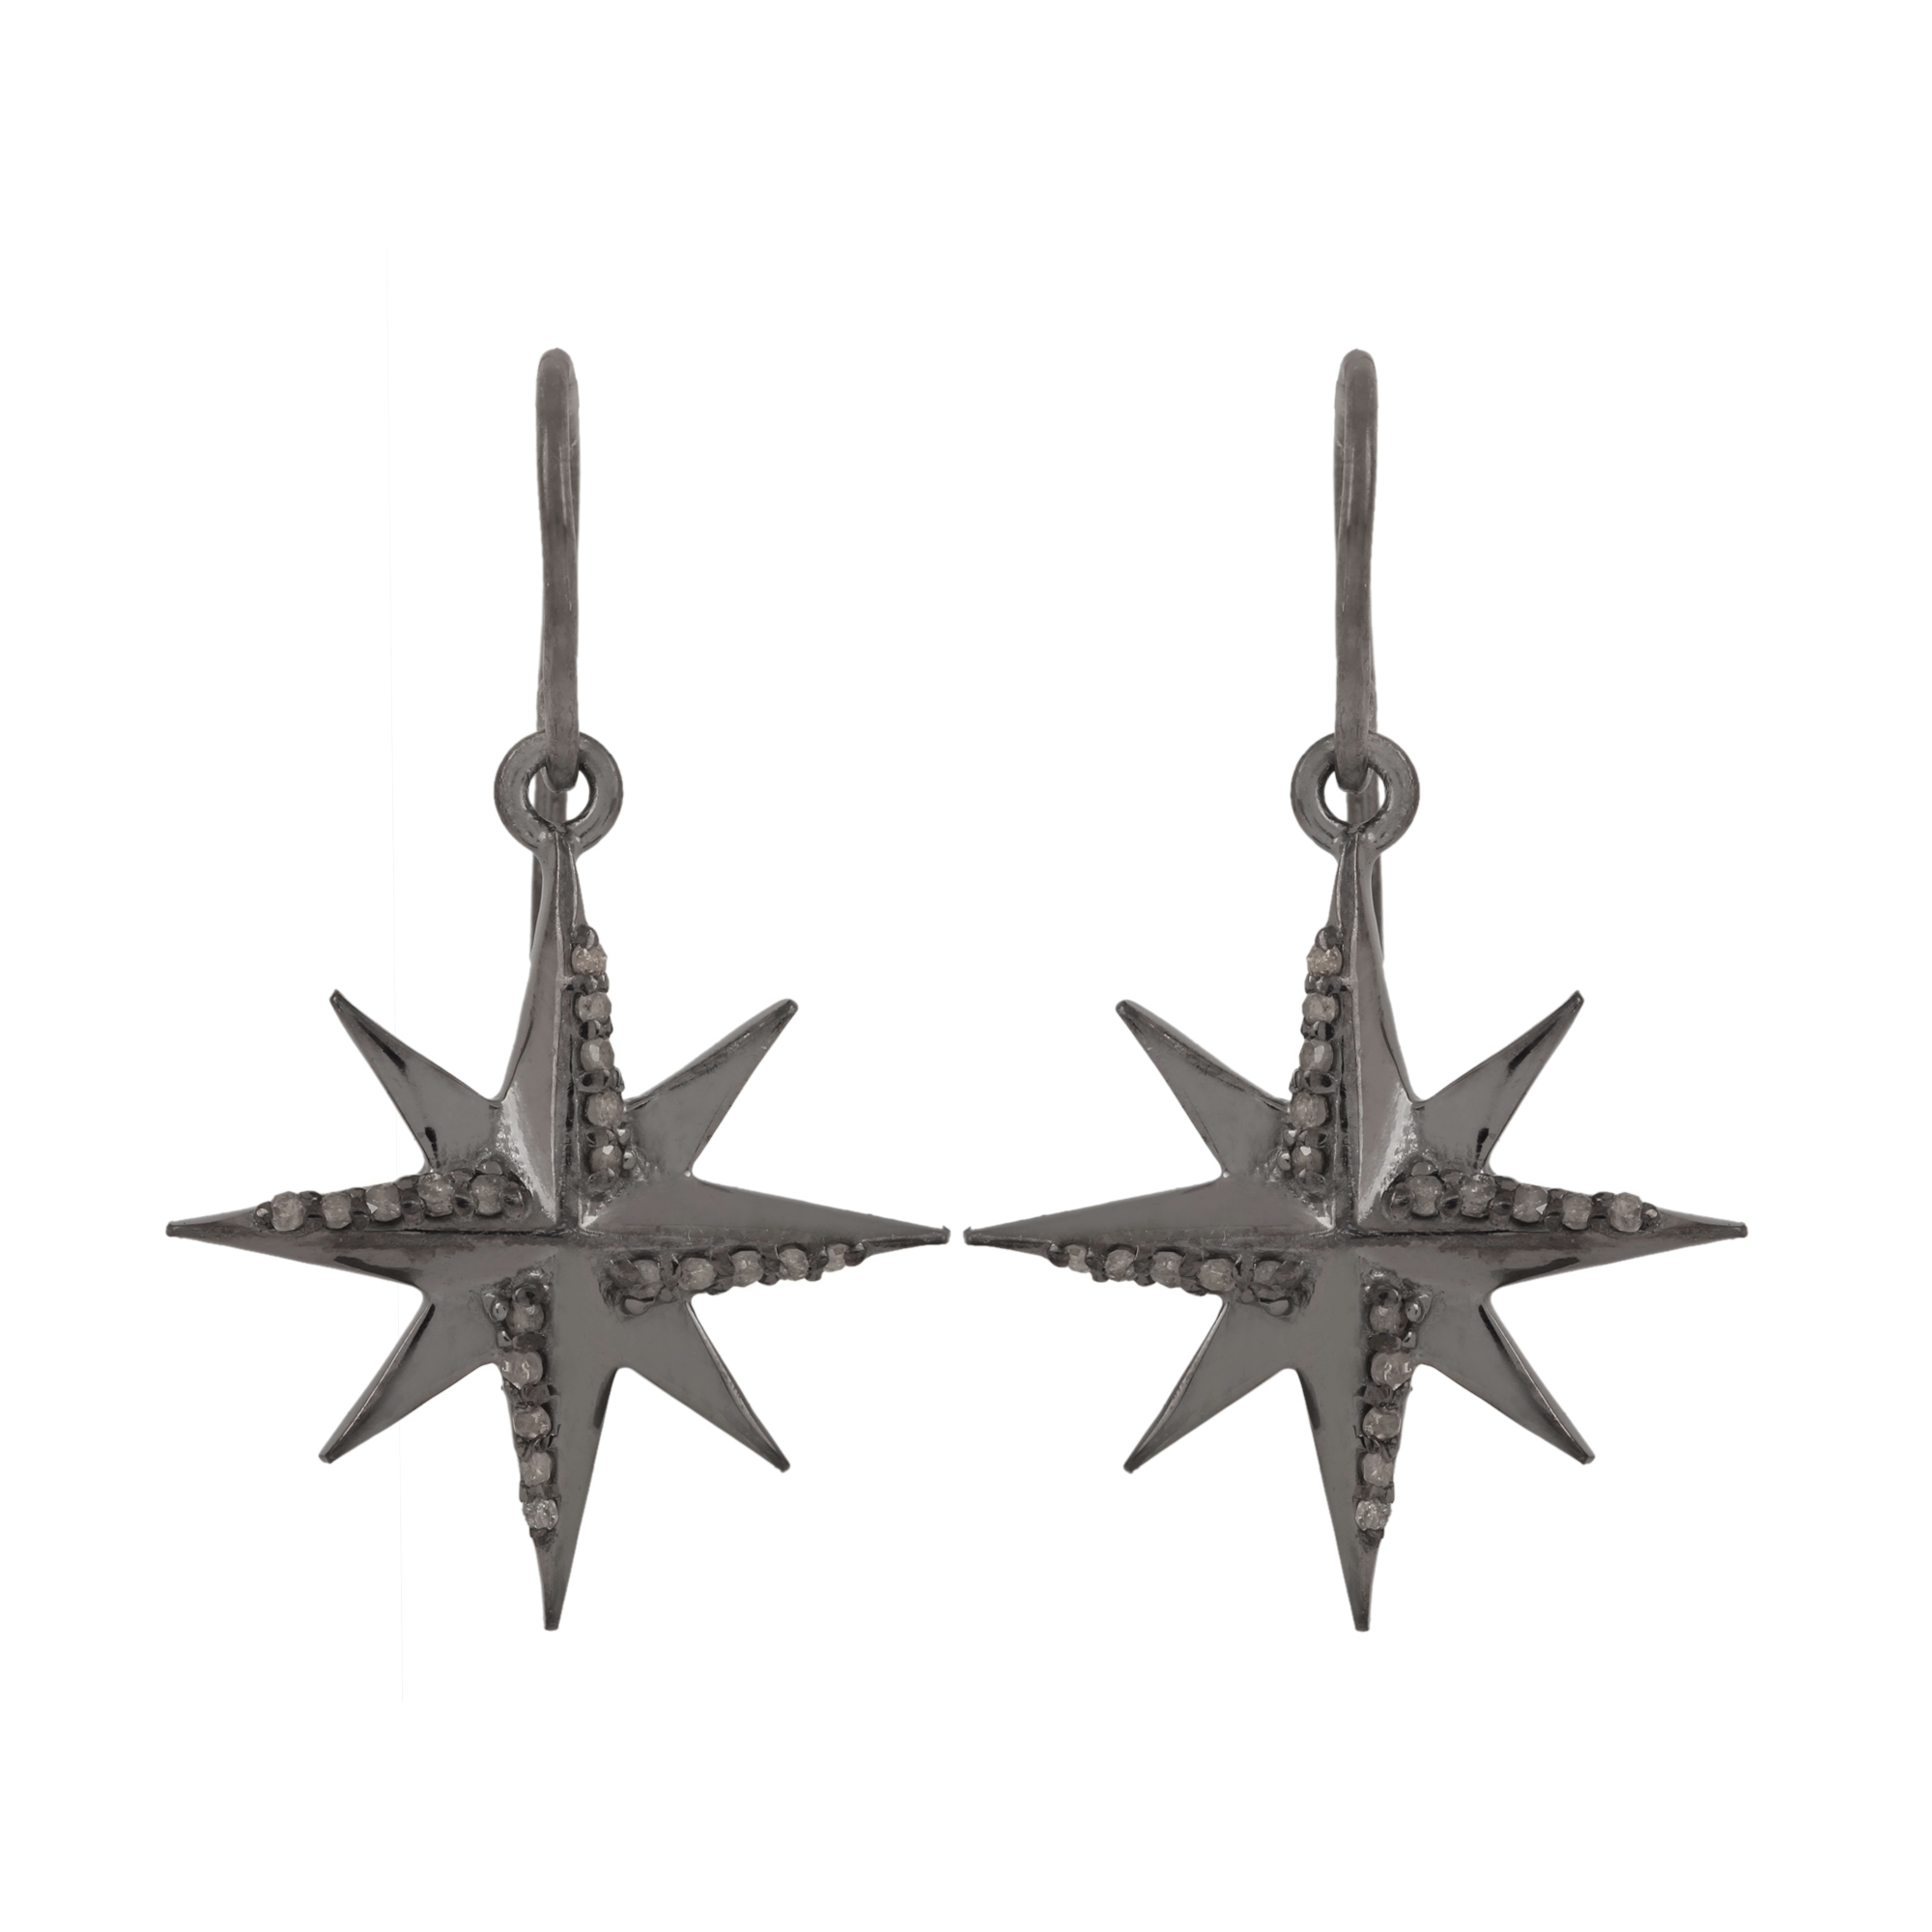 Natural diamond star hook earrings made in 925 sterling silver fine jewelry